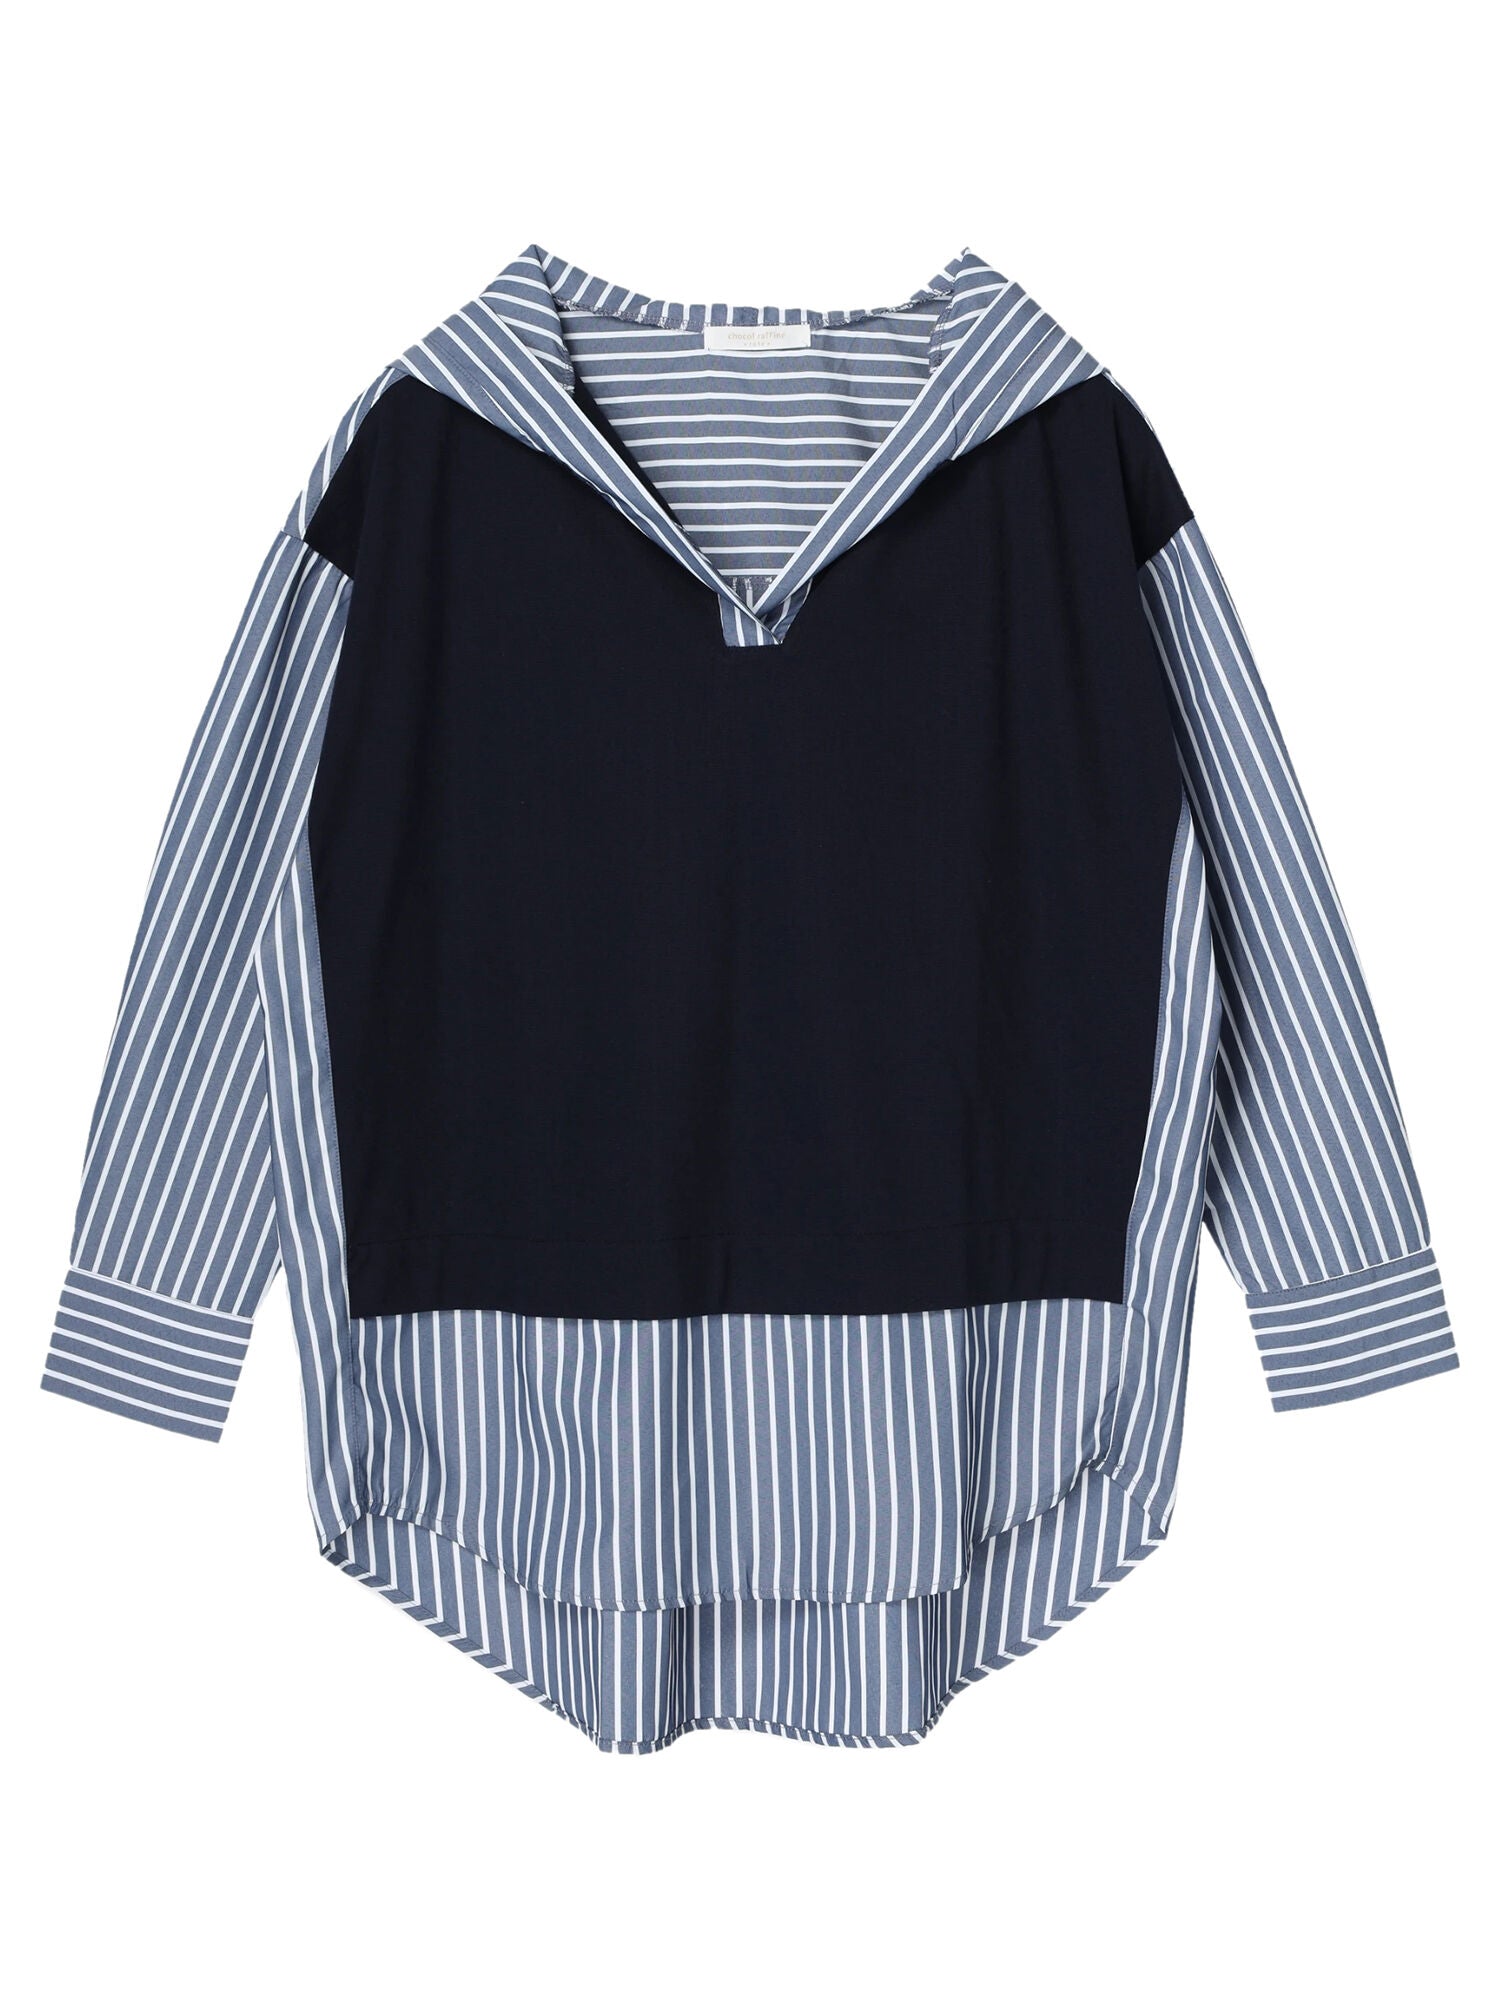 Ailee Hooded Striped Tunic